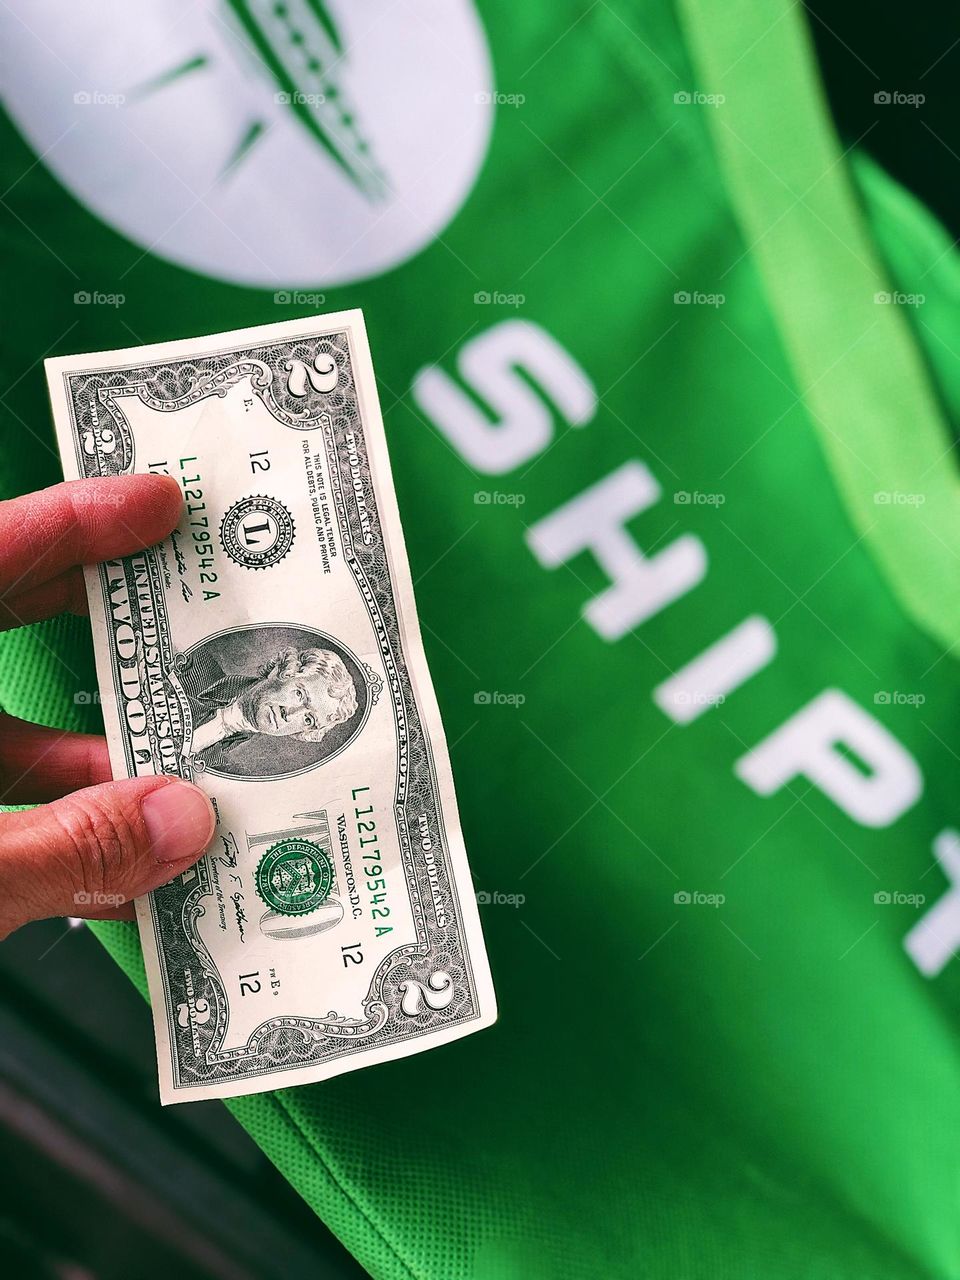 Green money with a green Shipt bag, Shipt shopper gets a tip on cash, green United States money, Shipt shopper gets tipped in cash, Shipt shopping service, two dollar bill for a tip, shopper gets a two dollar bill for a tip 